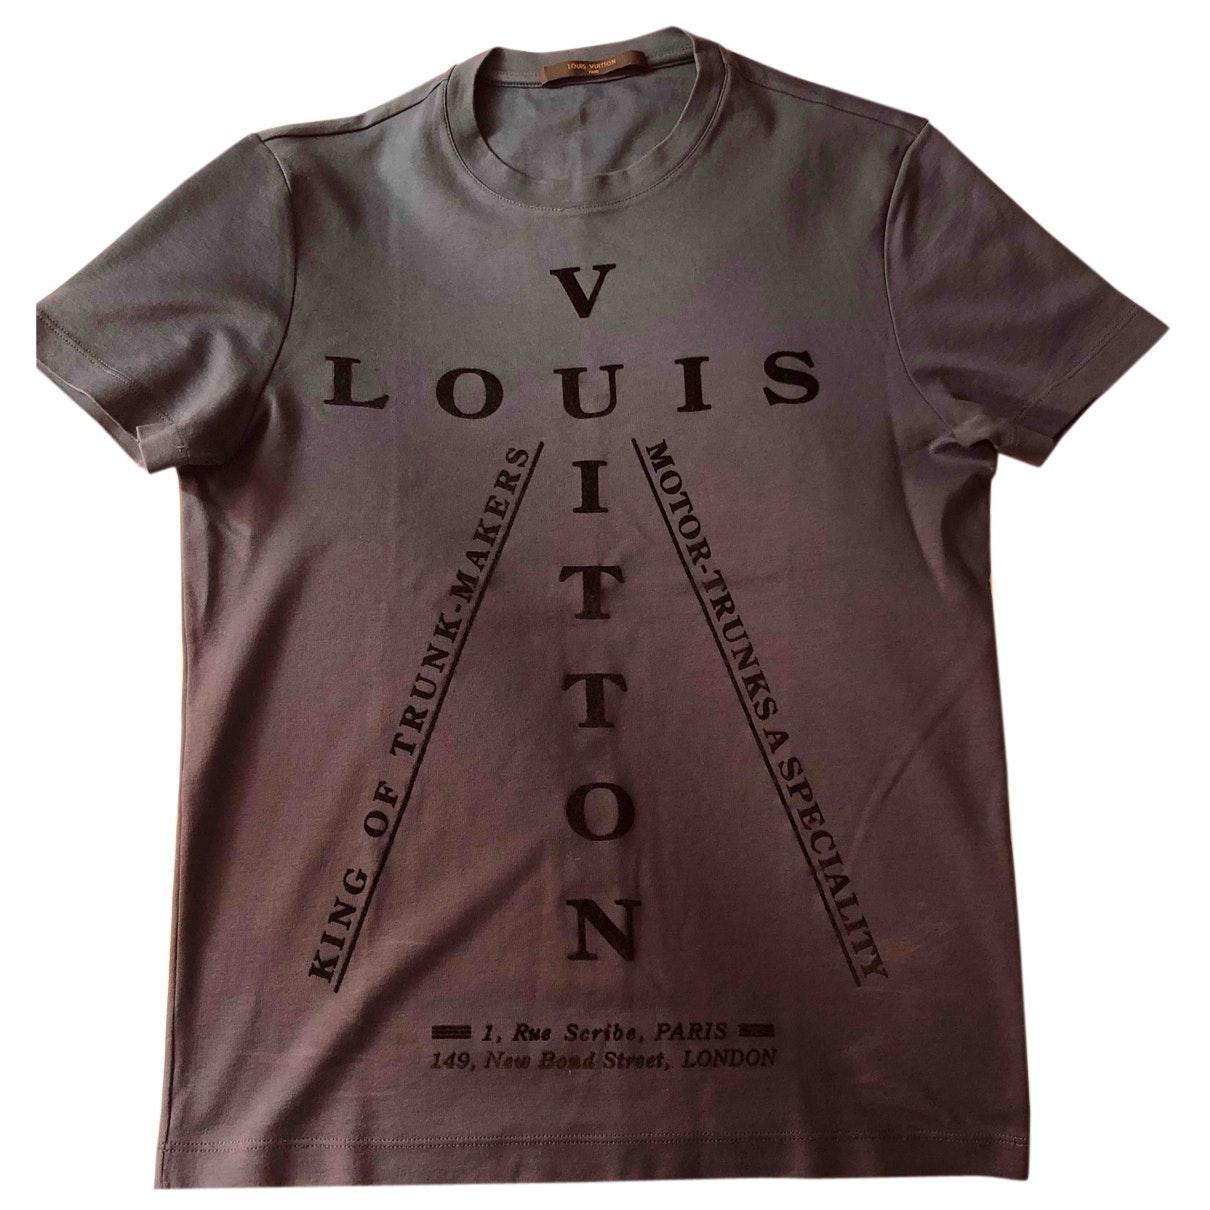 What Are Louis Vuitton Shirts Made Of What | semashow.com